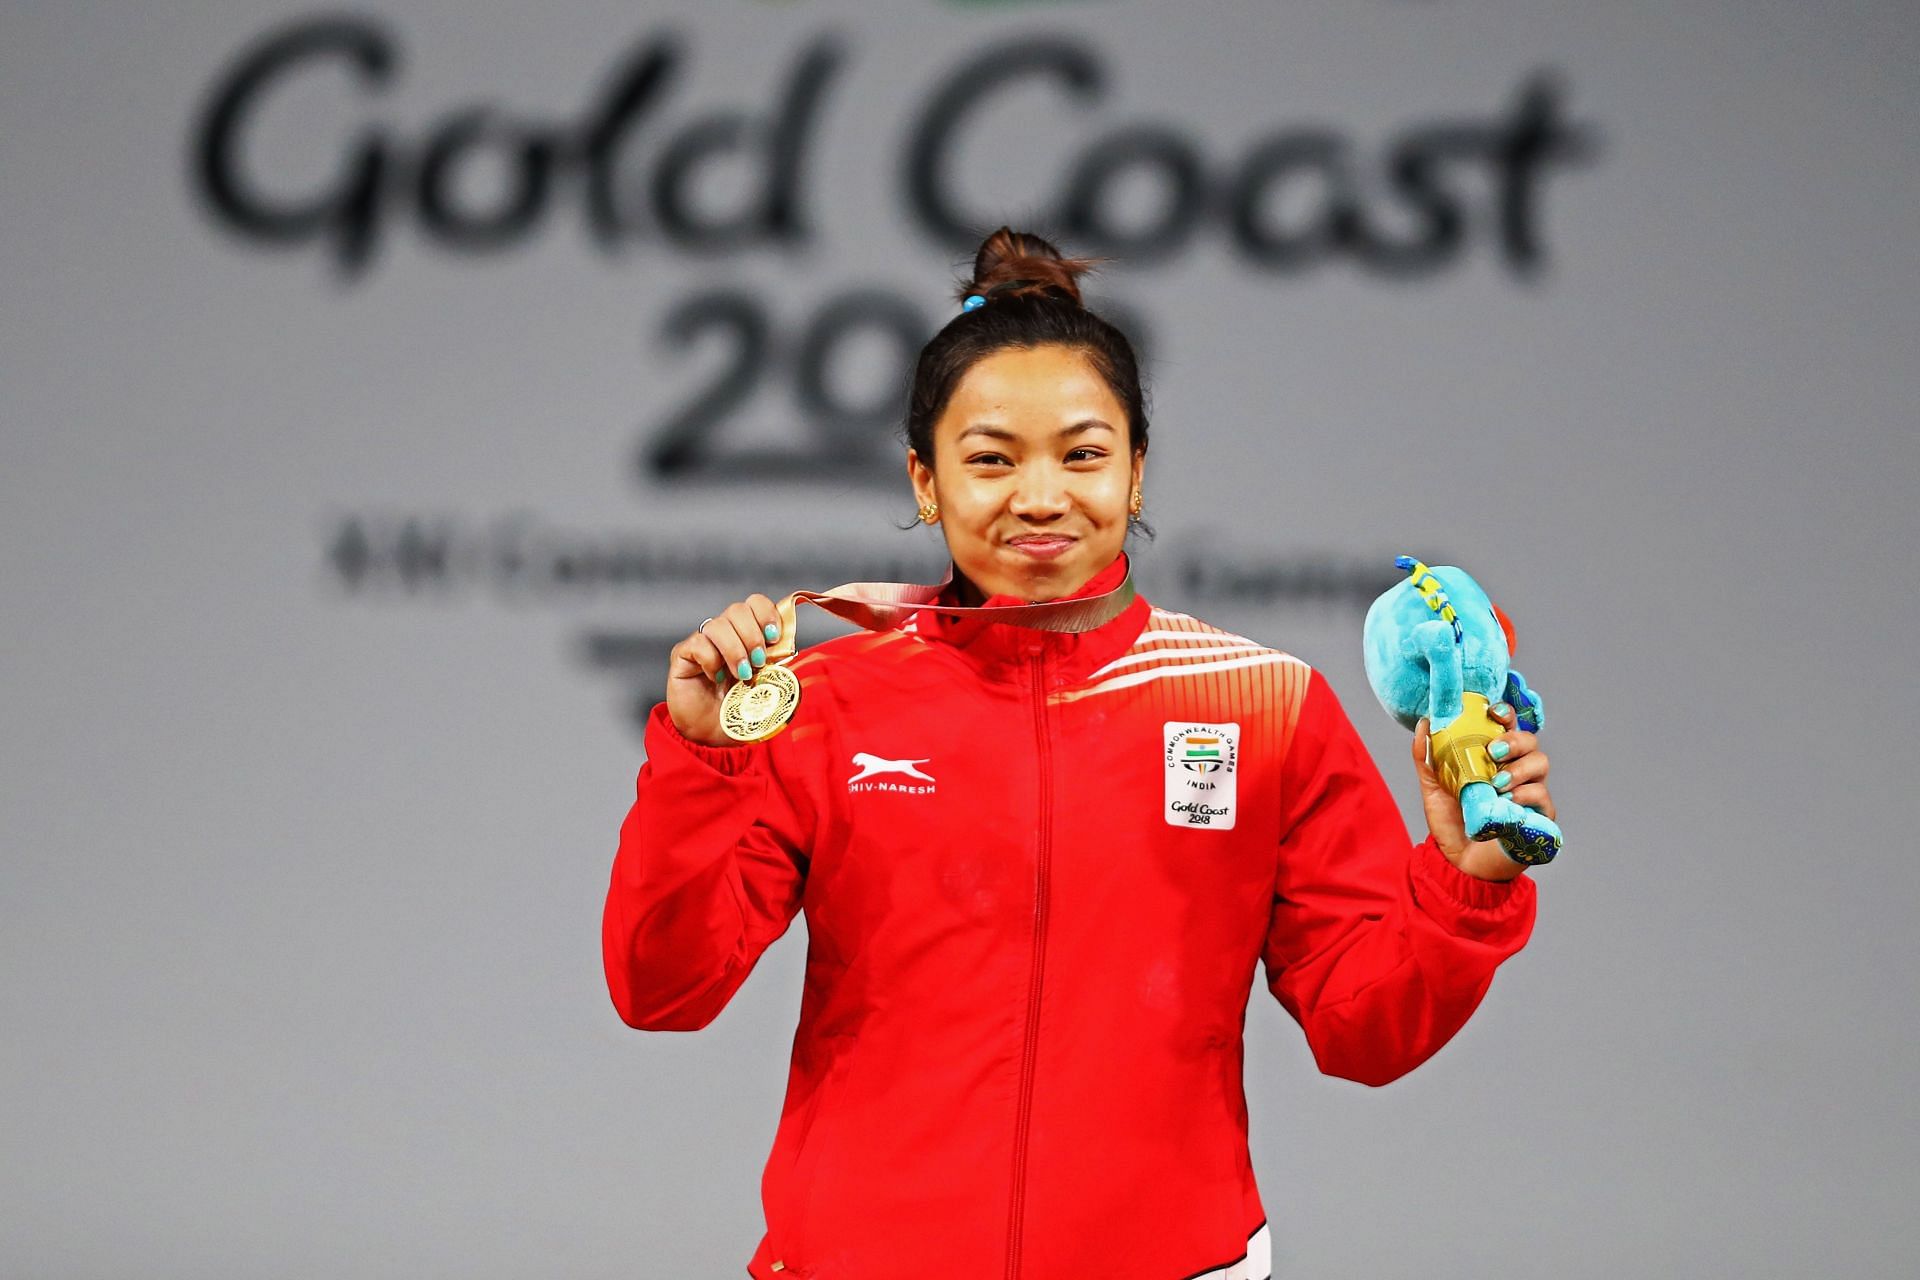 Mirabai Chanu with her gold medal at the 2018 Commonwealth Games. (Image courtesy: Getty)